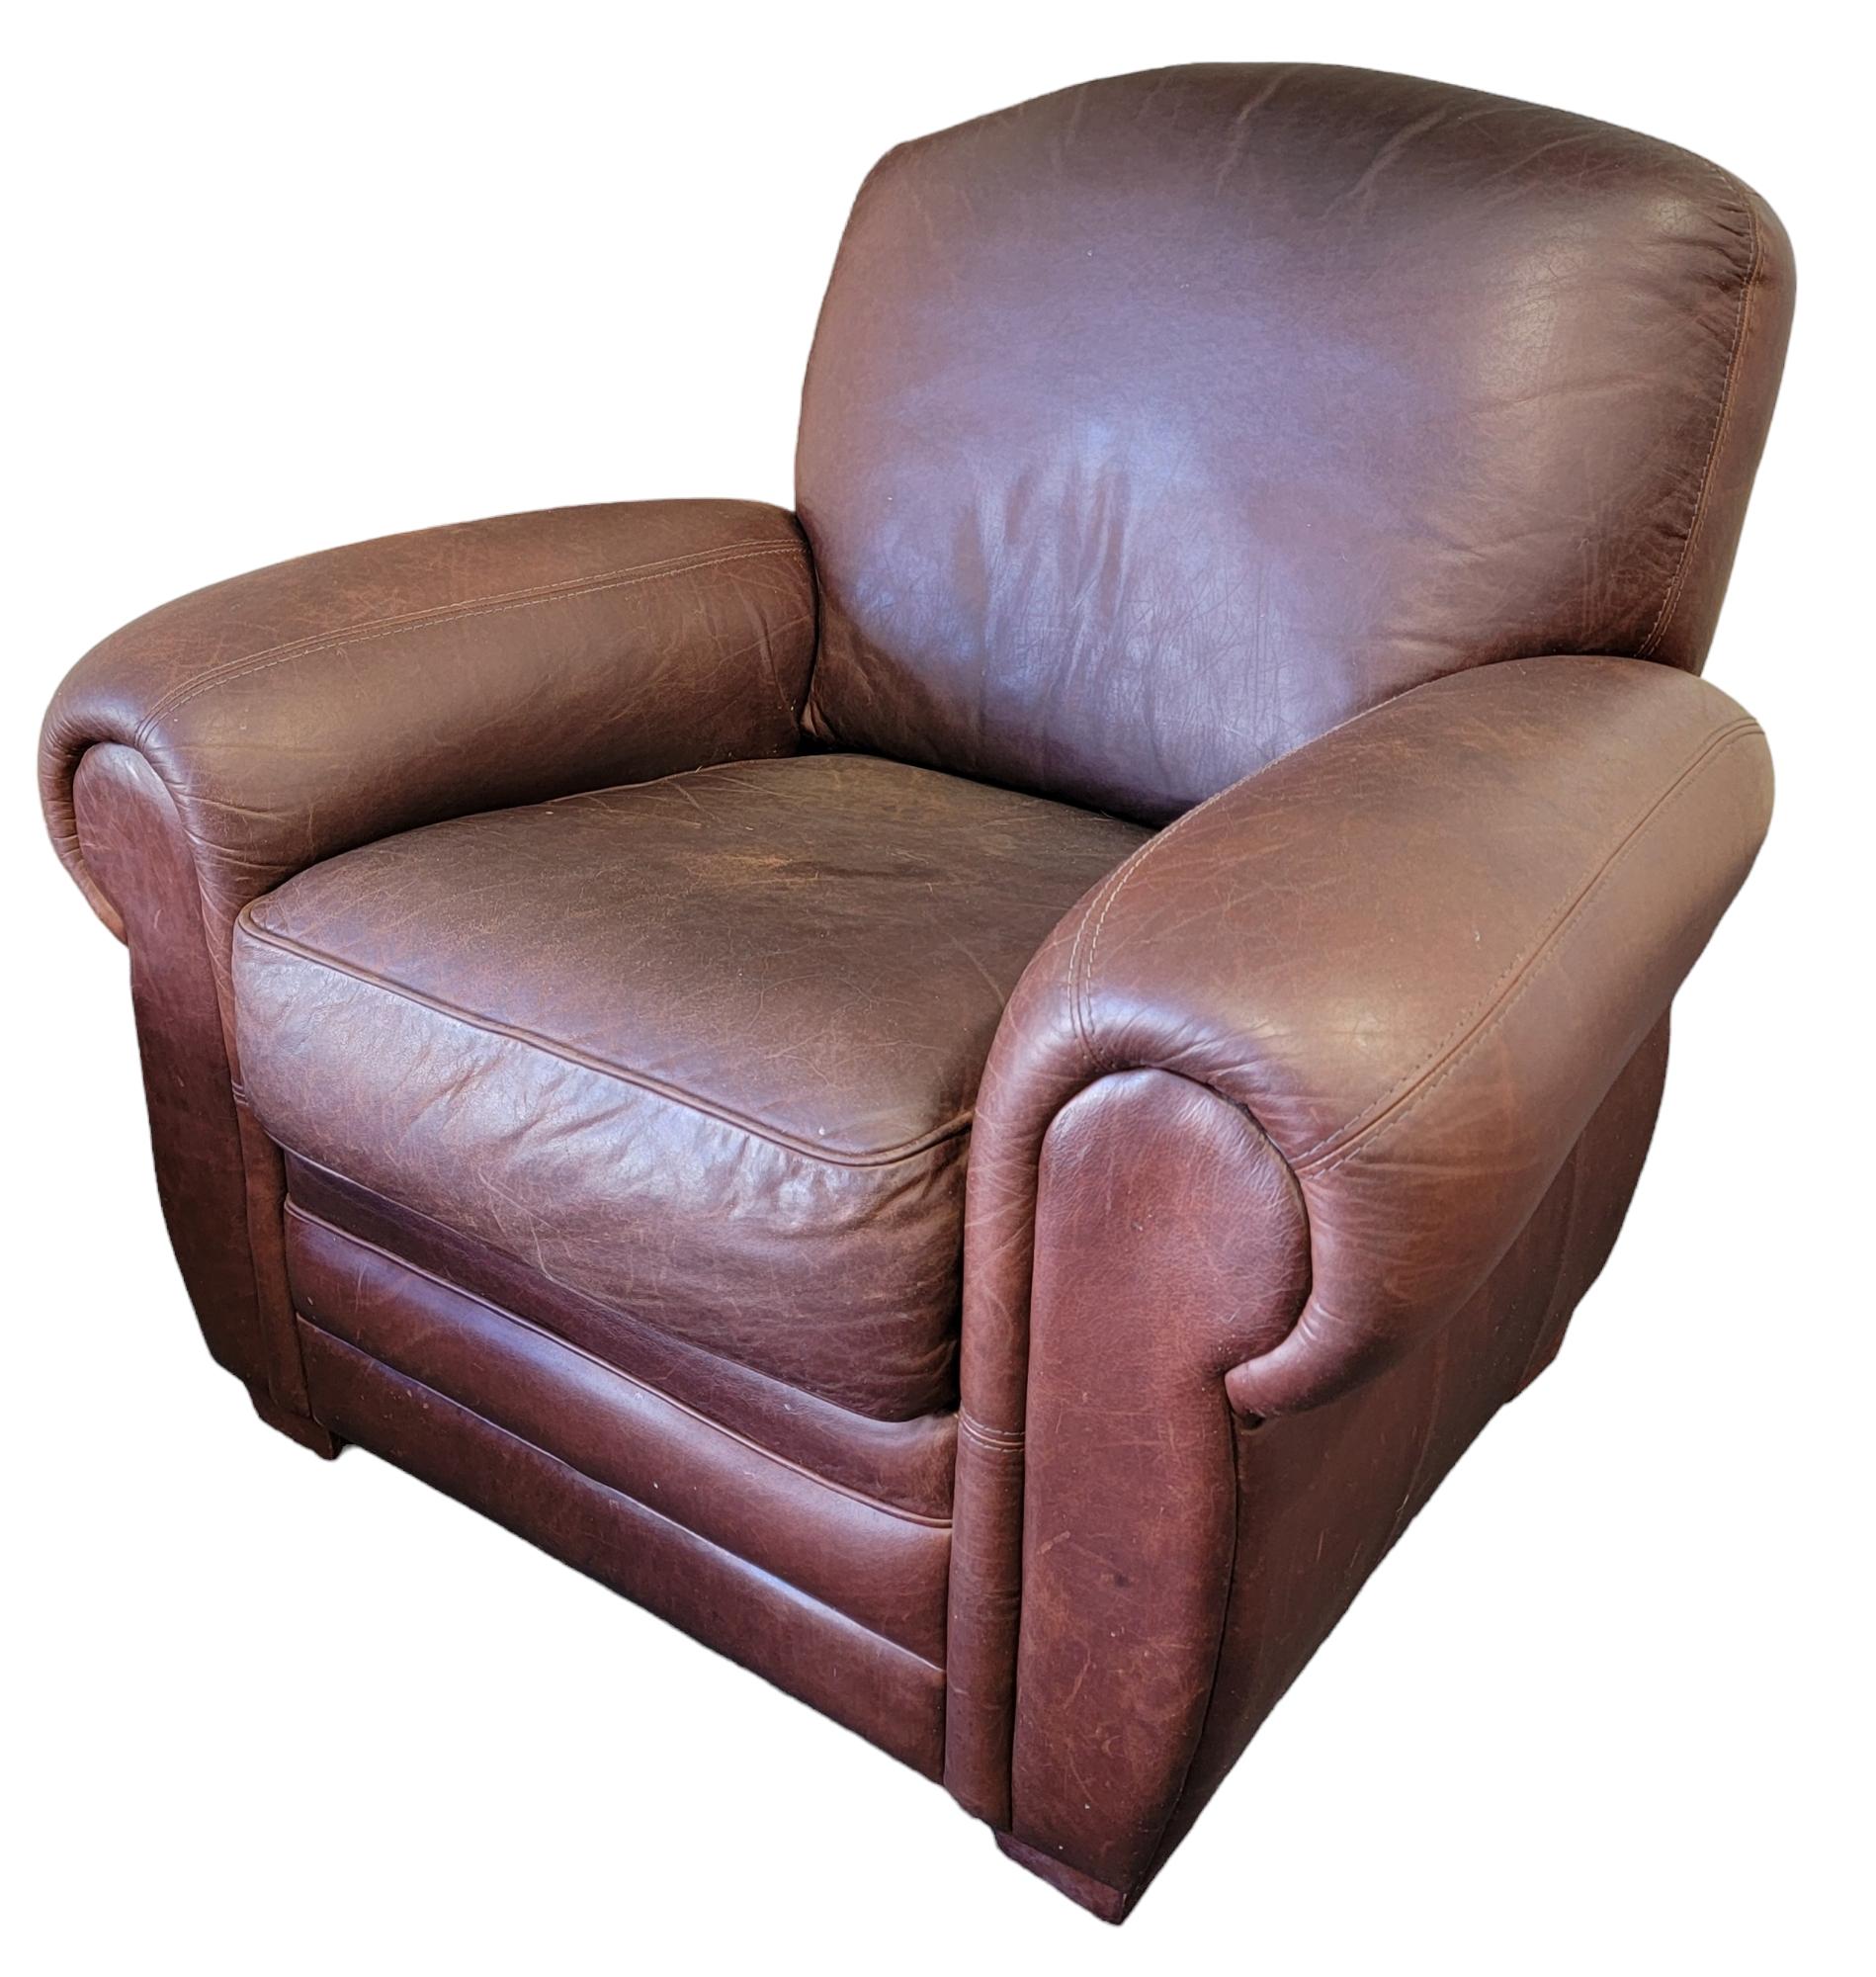 Italian Leatherette Club Chair and Ottoman, Wonderful brown color with wear to match. Wooden feet. Comfortable and soft to when sitting.

 Club chair measures approx - 41w x 35d x 37h and the Ottoman measures approx - 25 x 25 x 16
